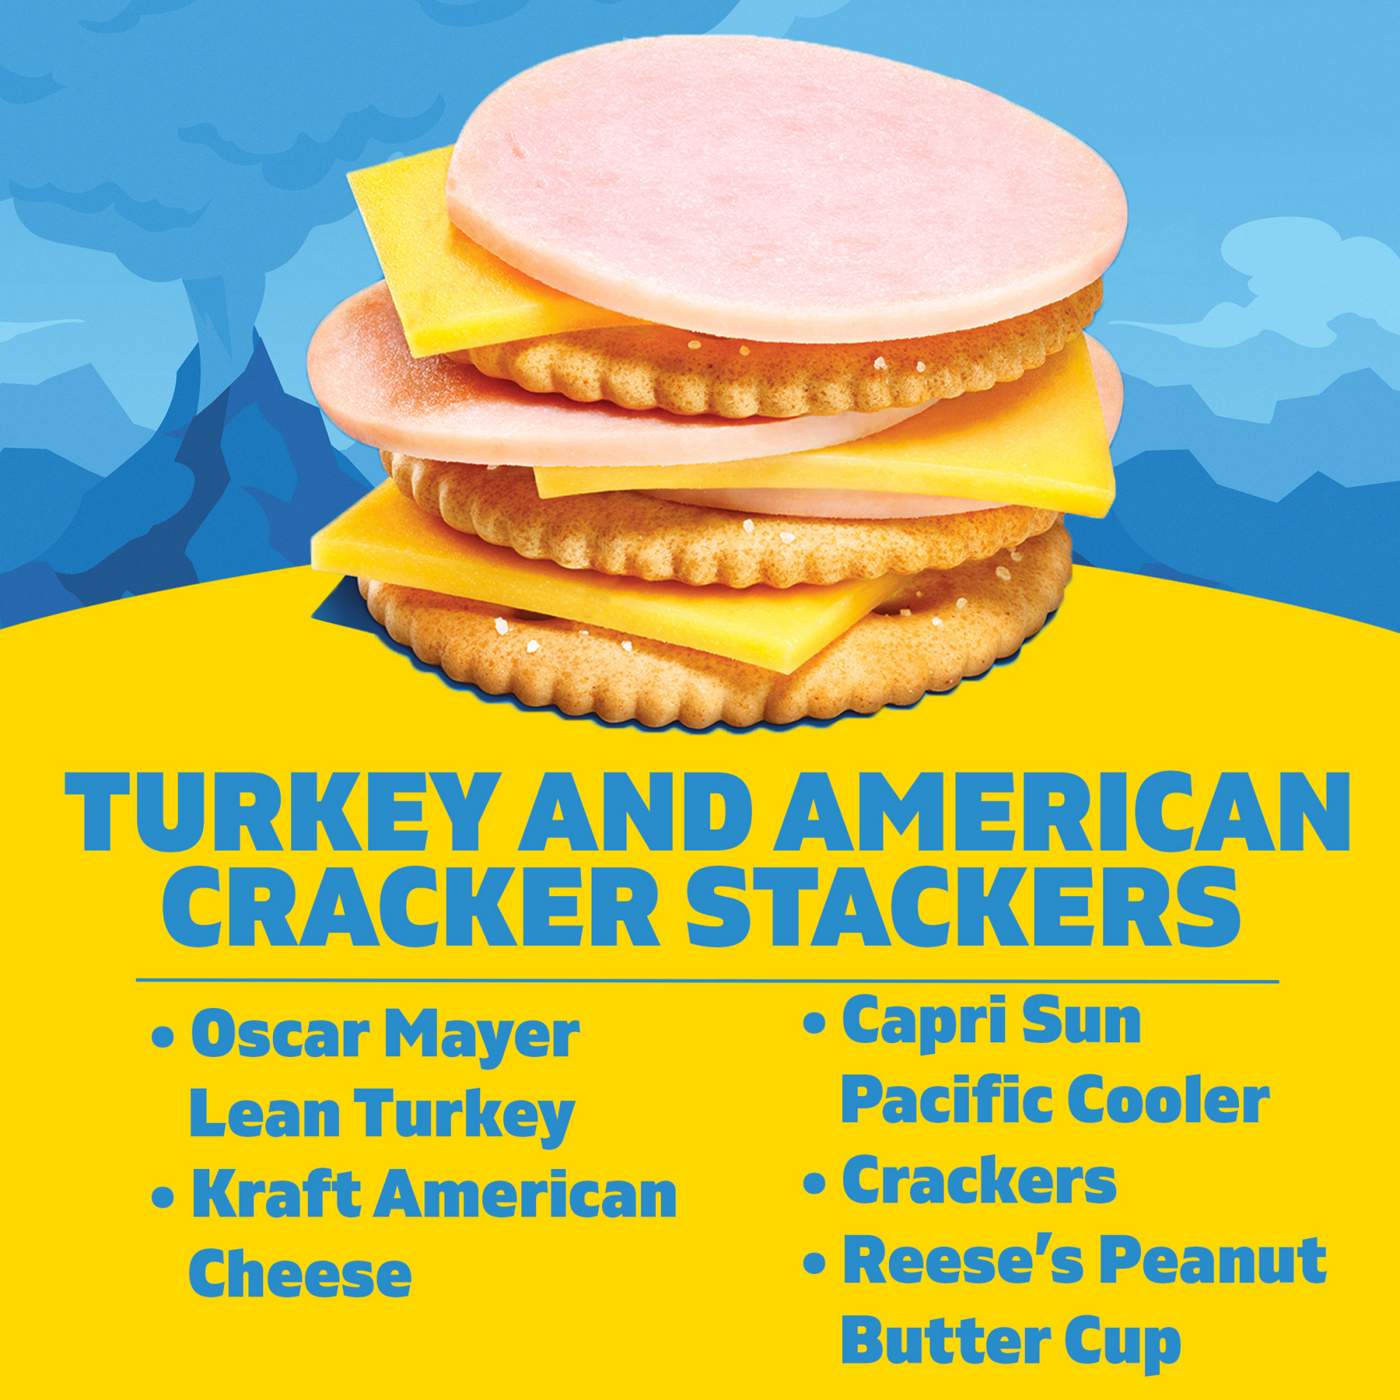 Lunchables Snack Kit Tray - Turkey & American Cracker Stackers, Capri Sun & Candy; image 4 of 4